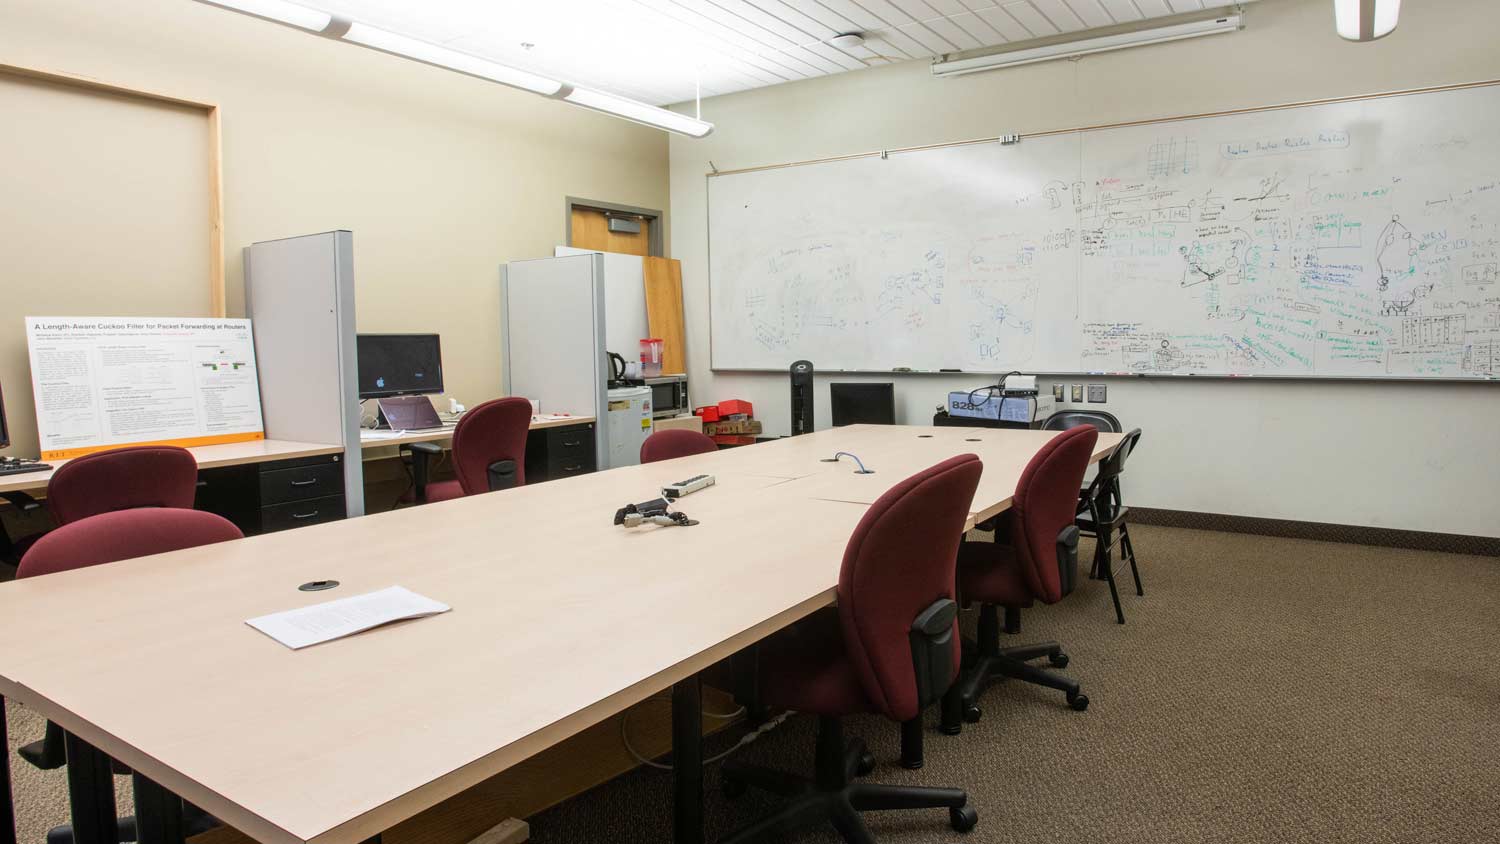 Carpeted room with a large whiteboard and conference table